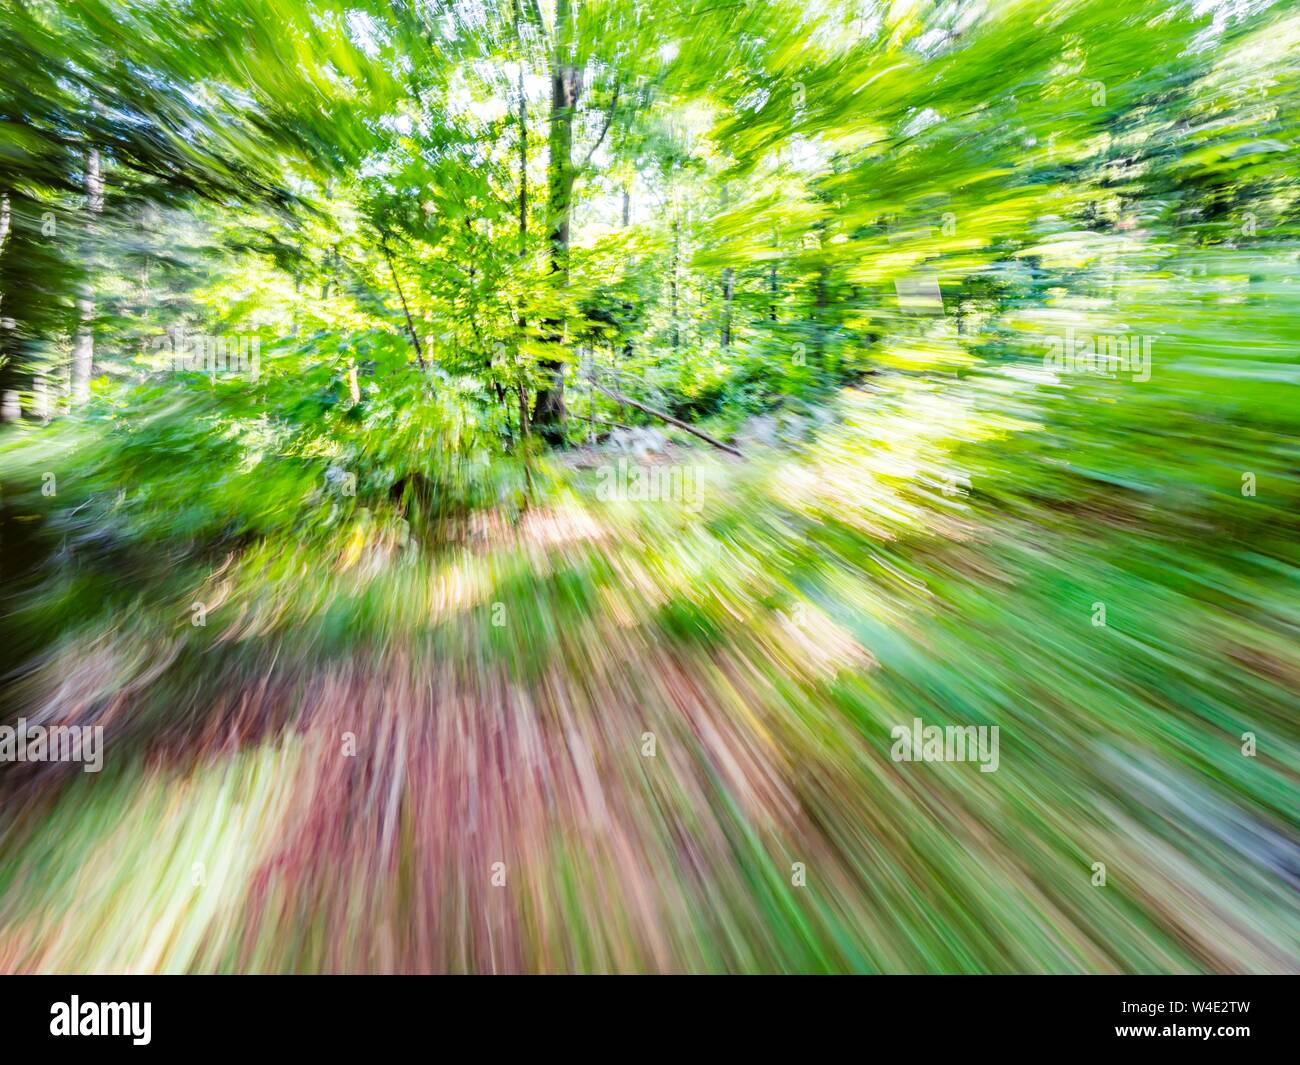 Green forest countryside speeding through dense trees natural environment landscape scenic Stock Photo